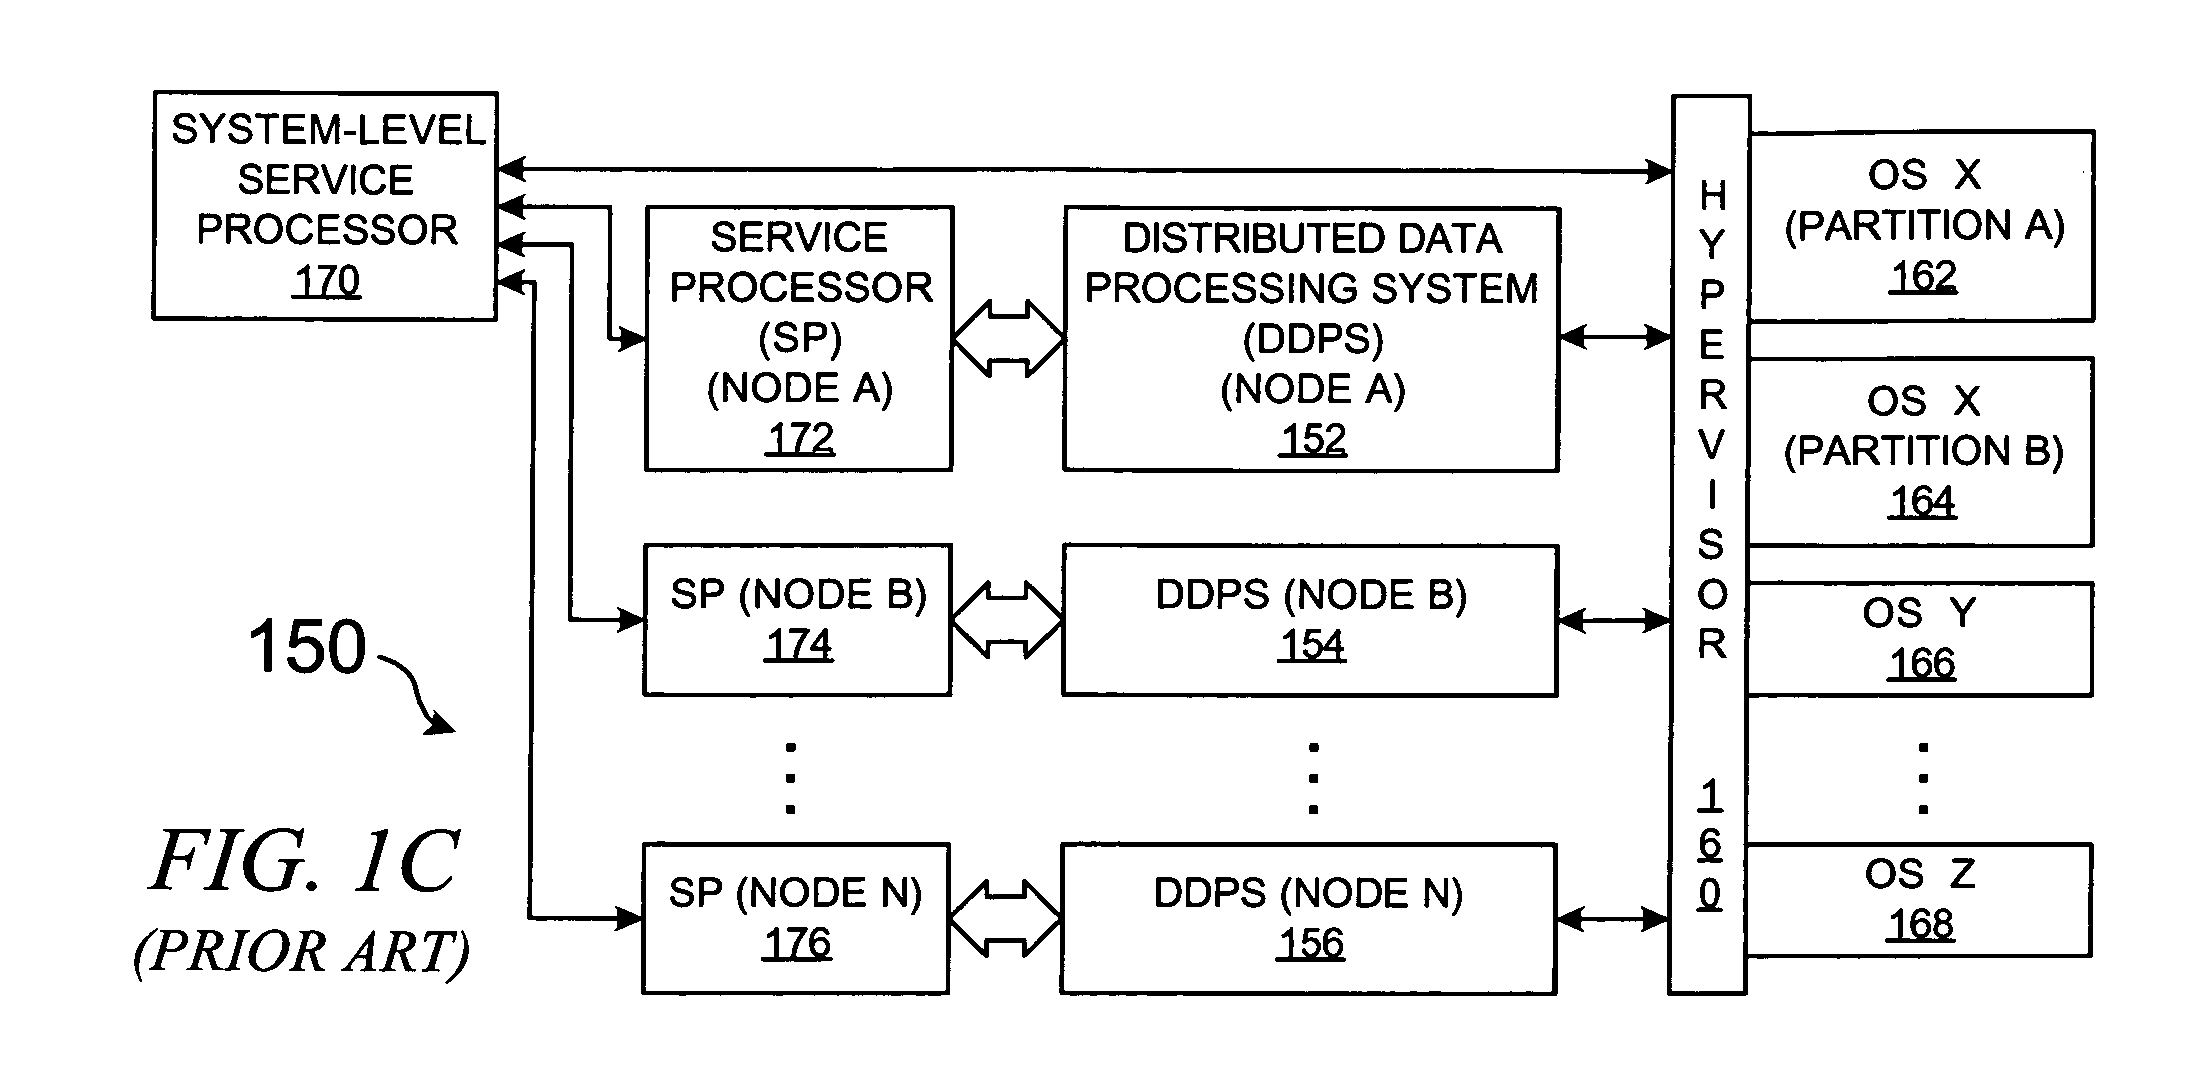 Method and system for virtualization of trusted platform modules